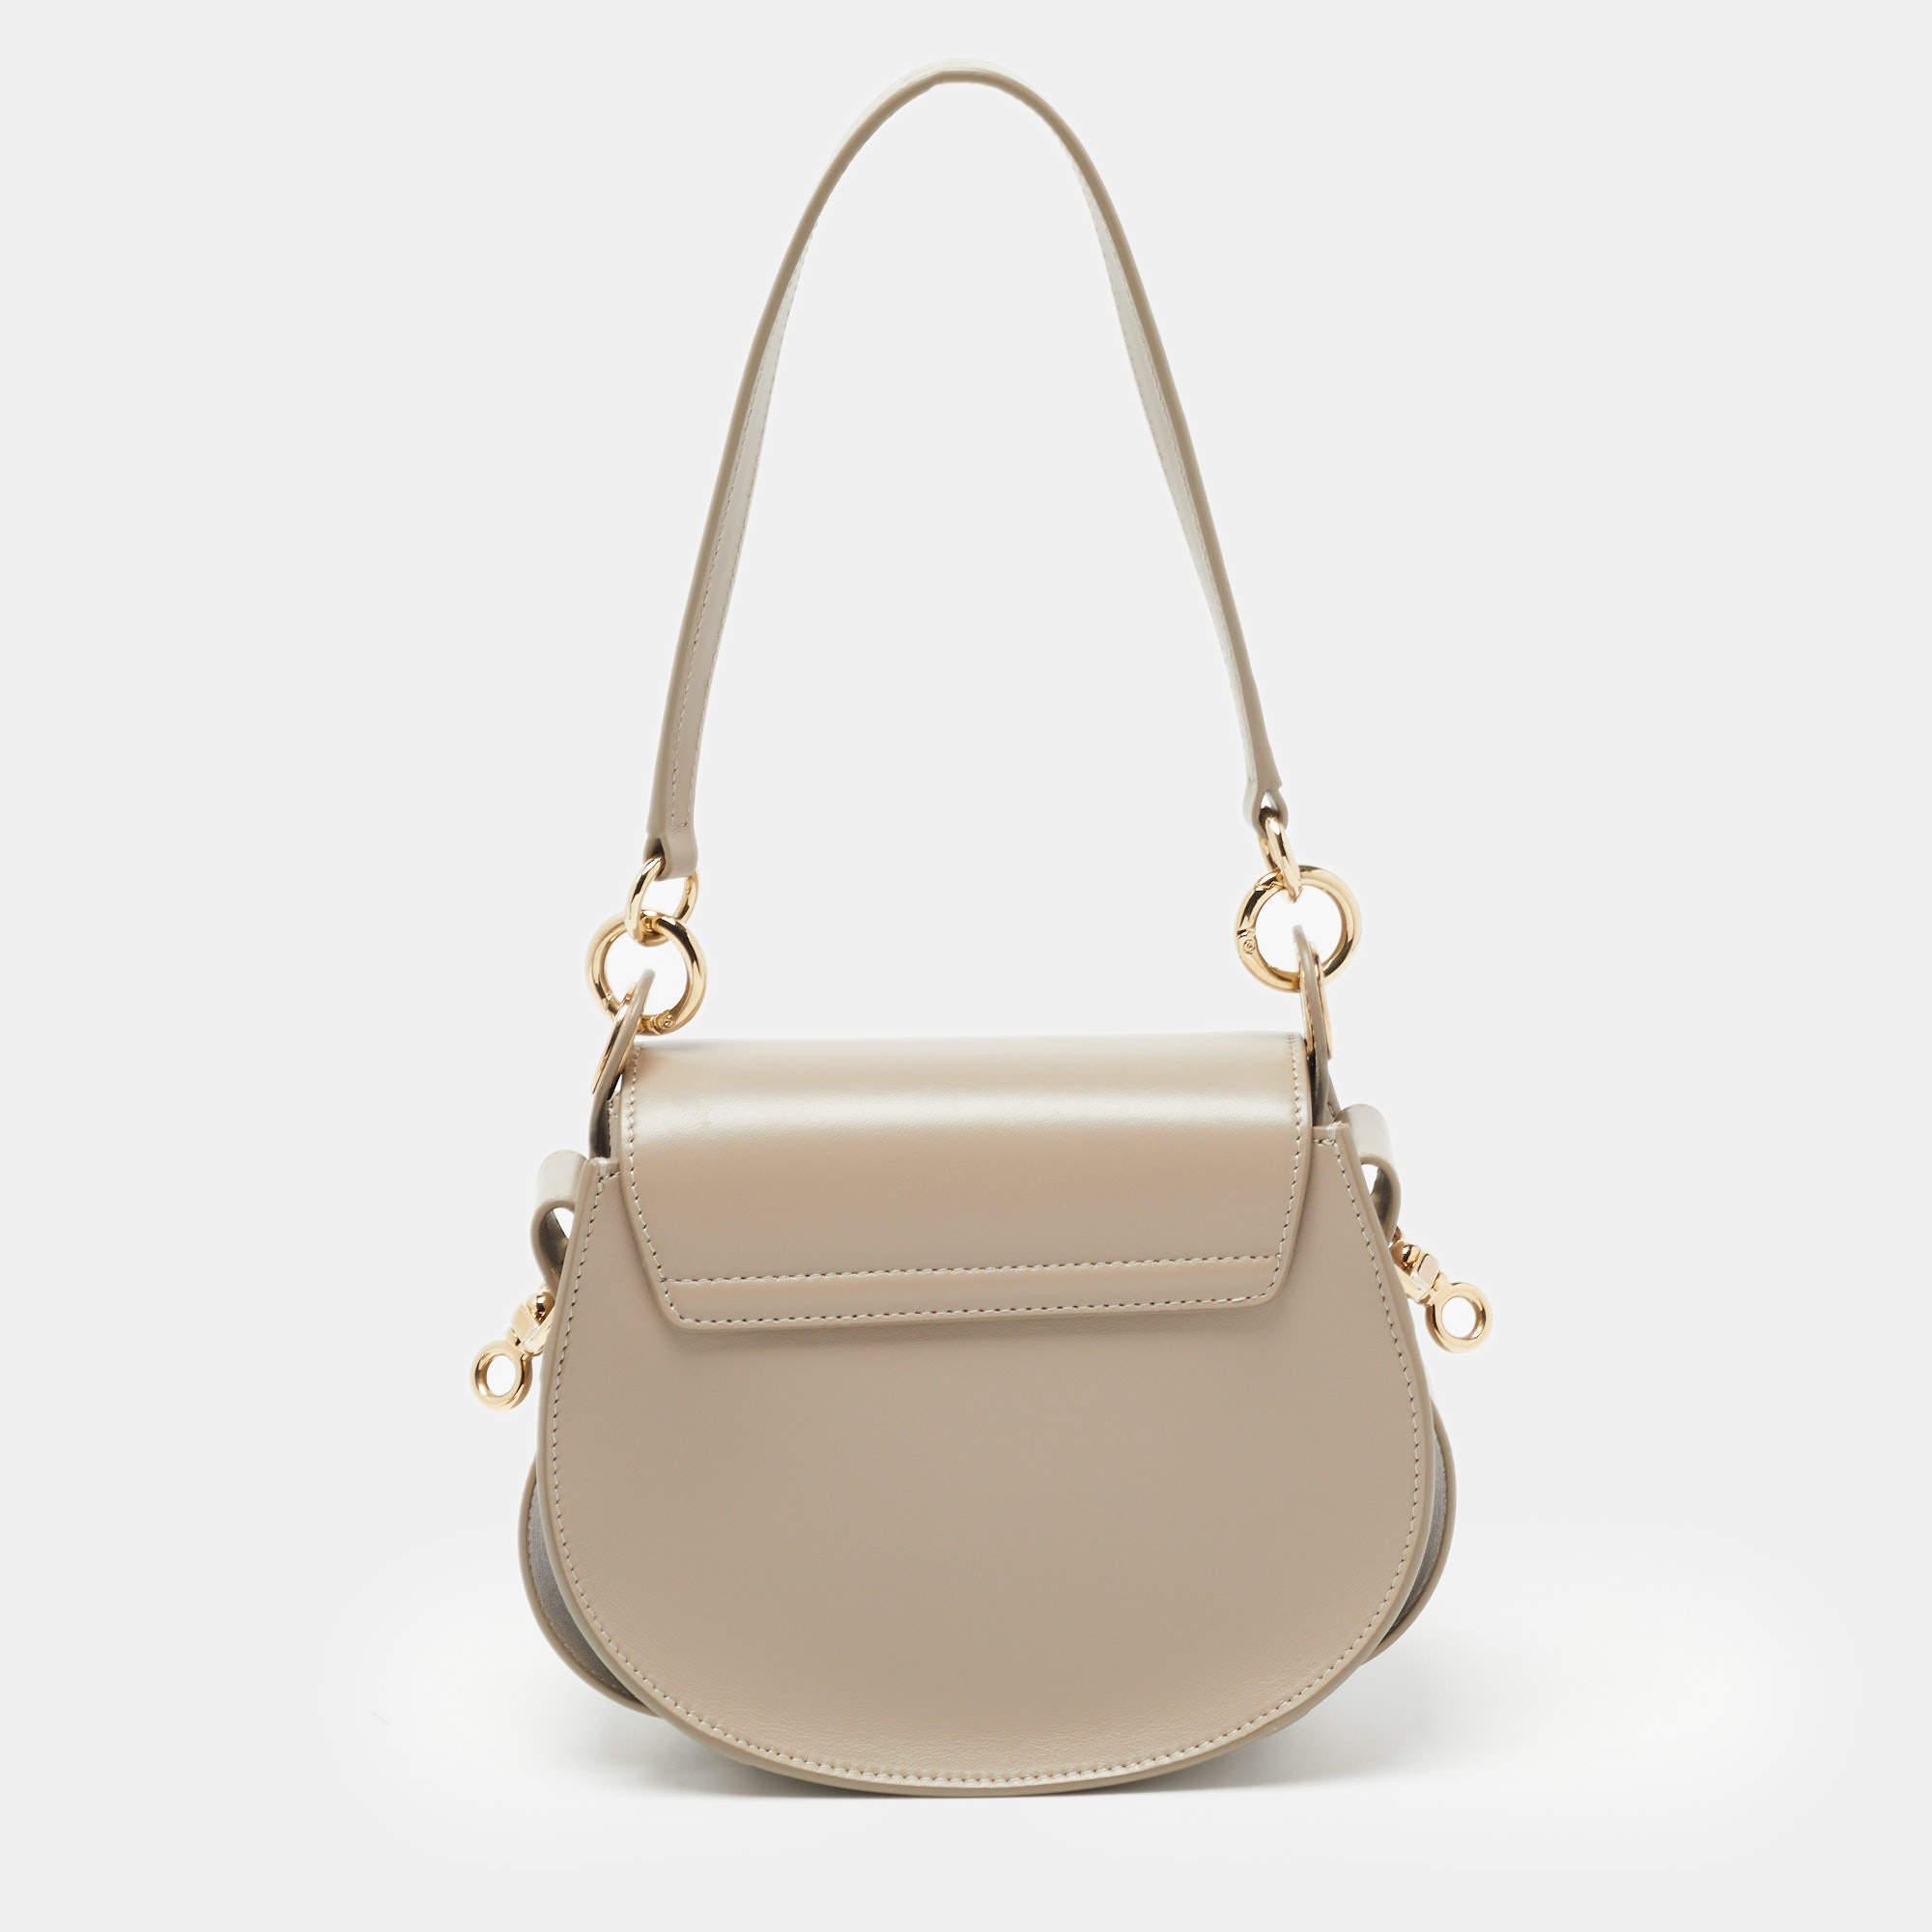 From the saddle shape to the gold-tone metal accents on the front, this Tess bag from Chloe is statement-making. It is crafted from leather and suede with a handle and a shoulder strap. The interior is lined with fabric.

Includes: Original Dustbag,